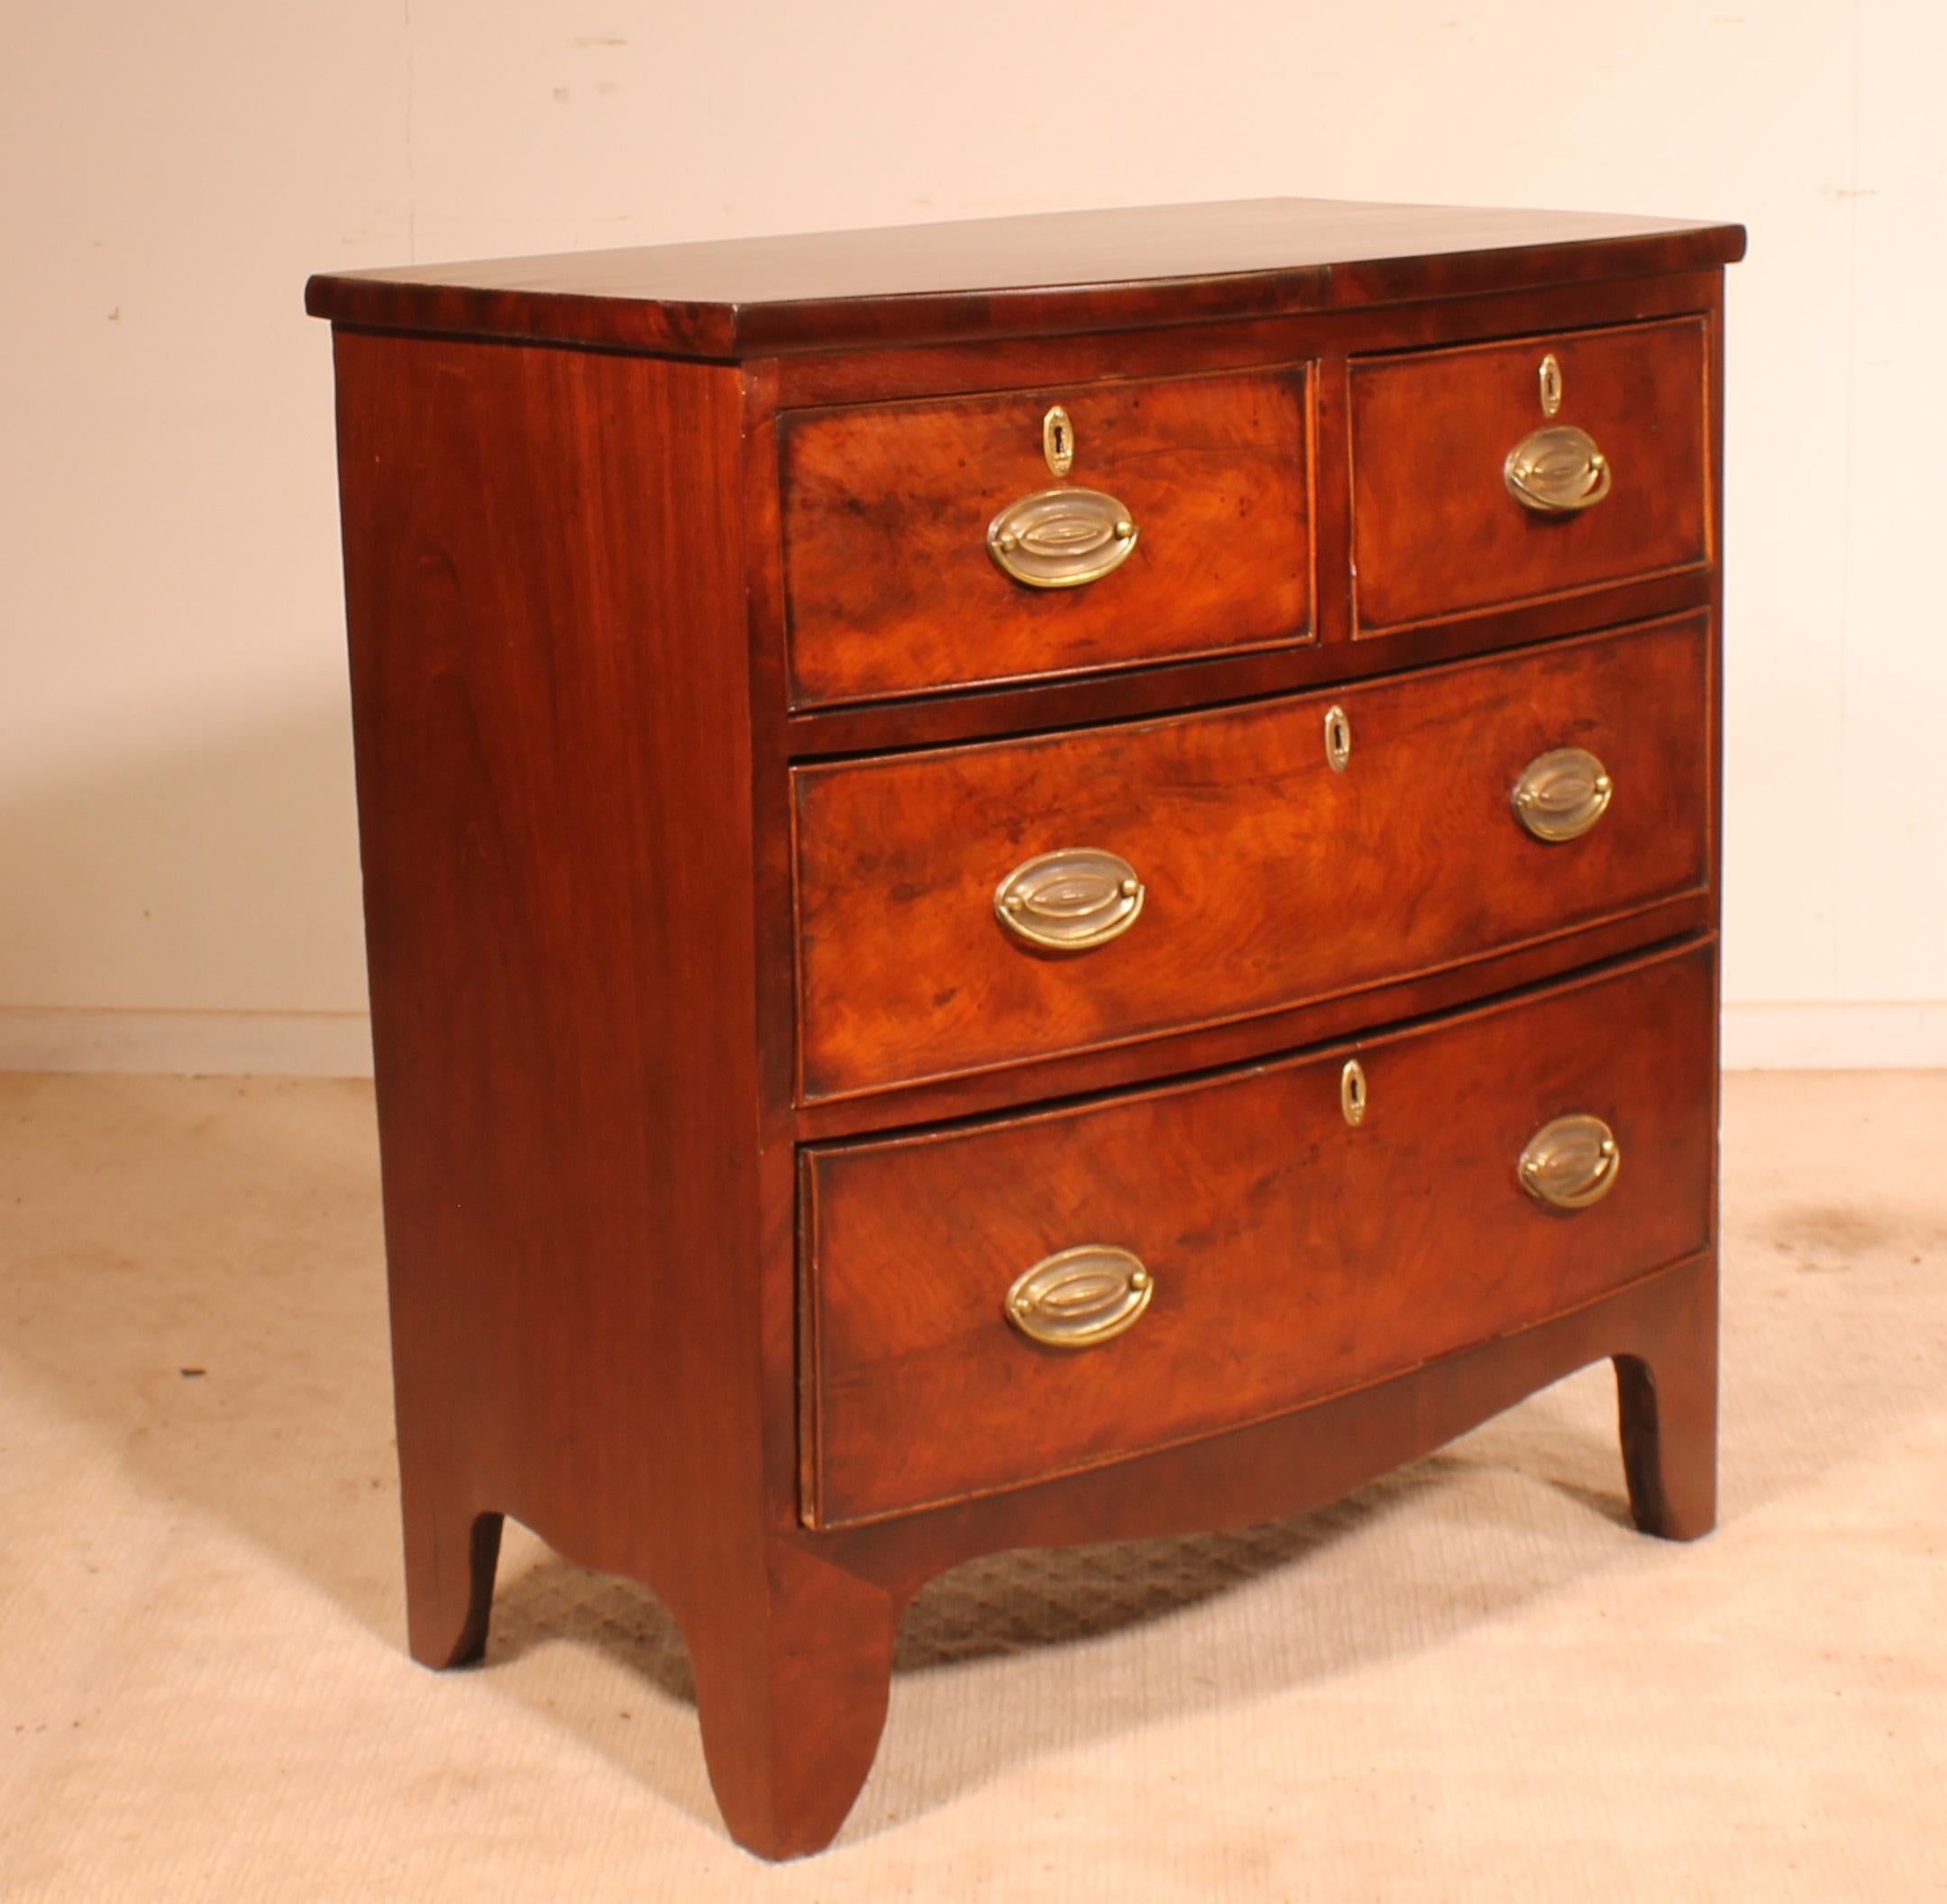 Small Bowfornt Mahogany Chest of Drawers 19th Century England 1